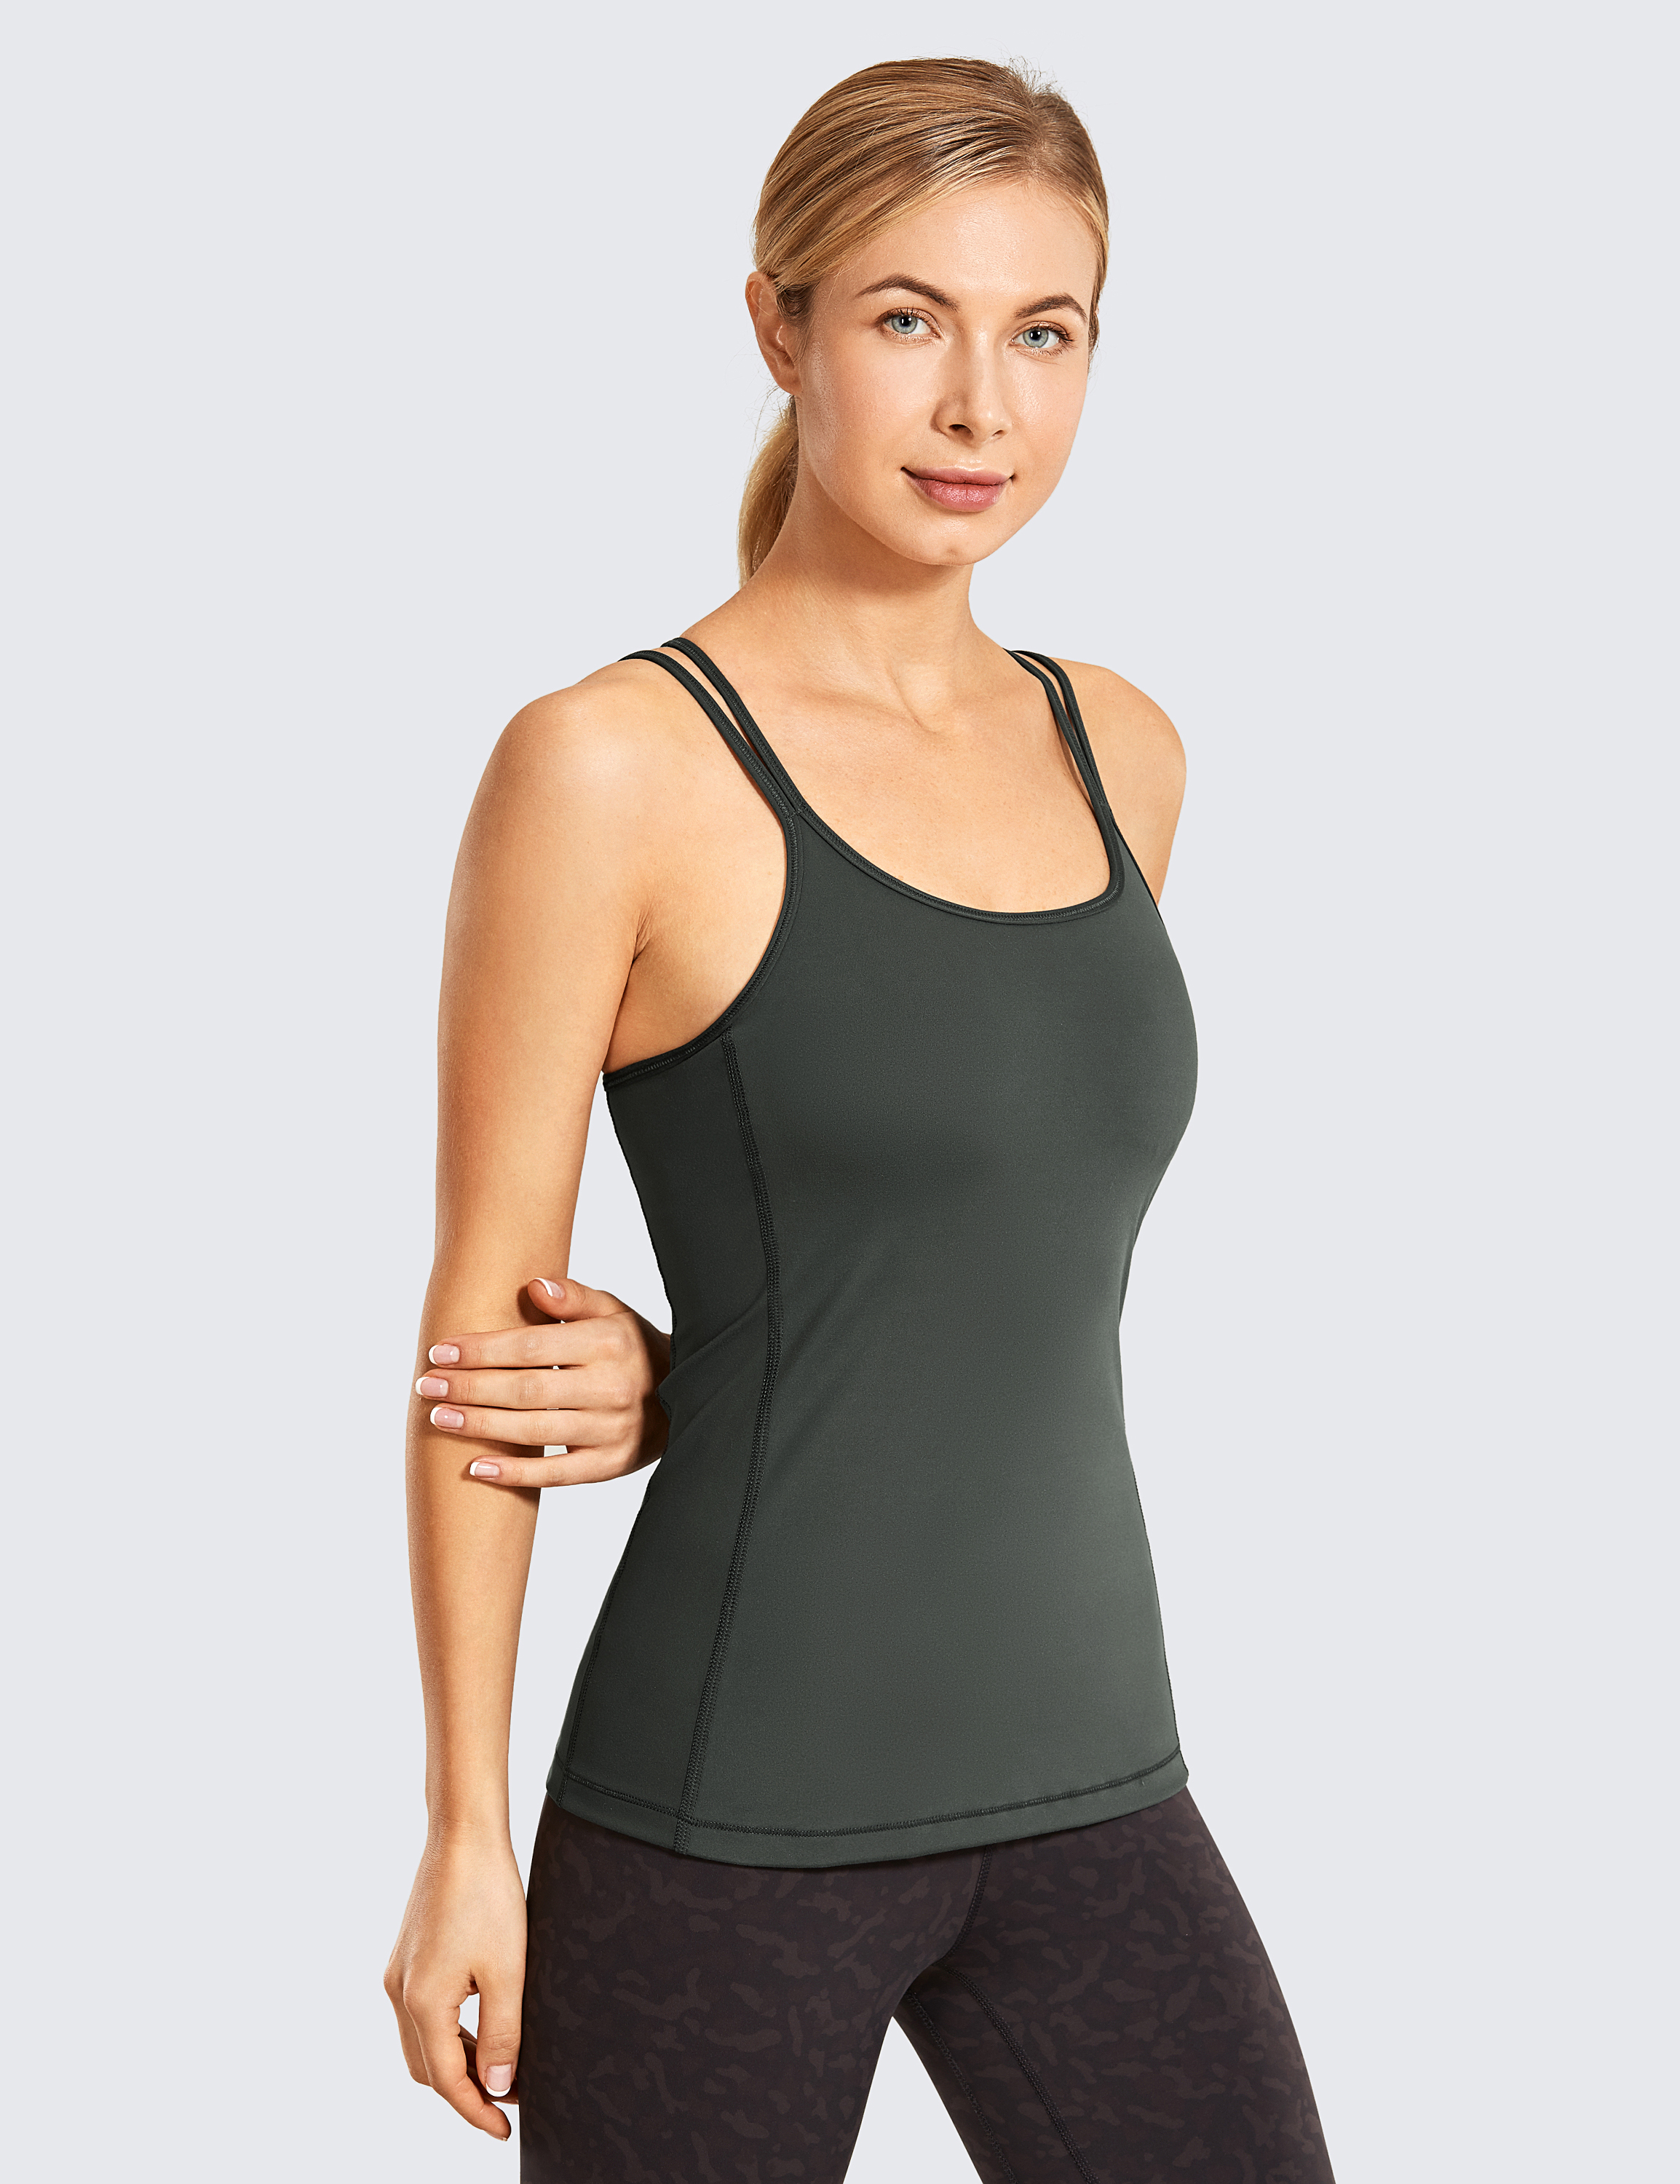 Crz Yoga Workout Tank Tops With Built In Bra For Women Criss Cross Strappy Back Ebay 